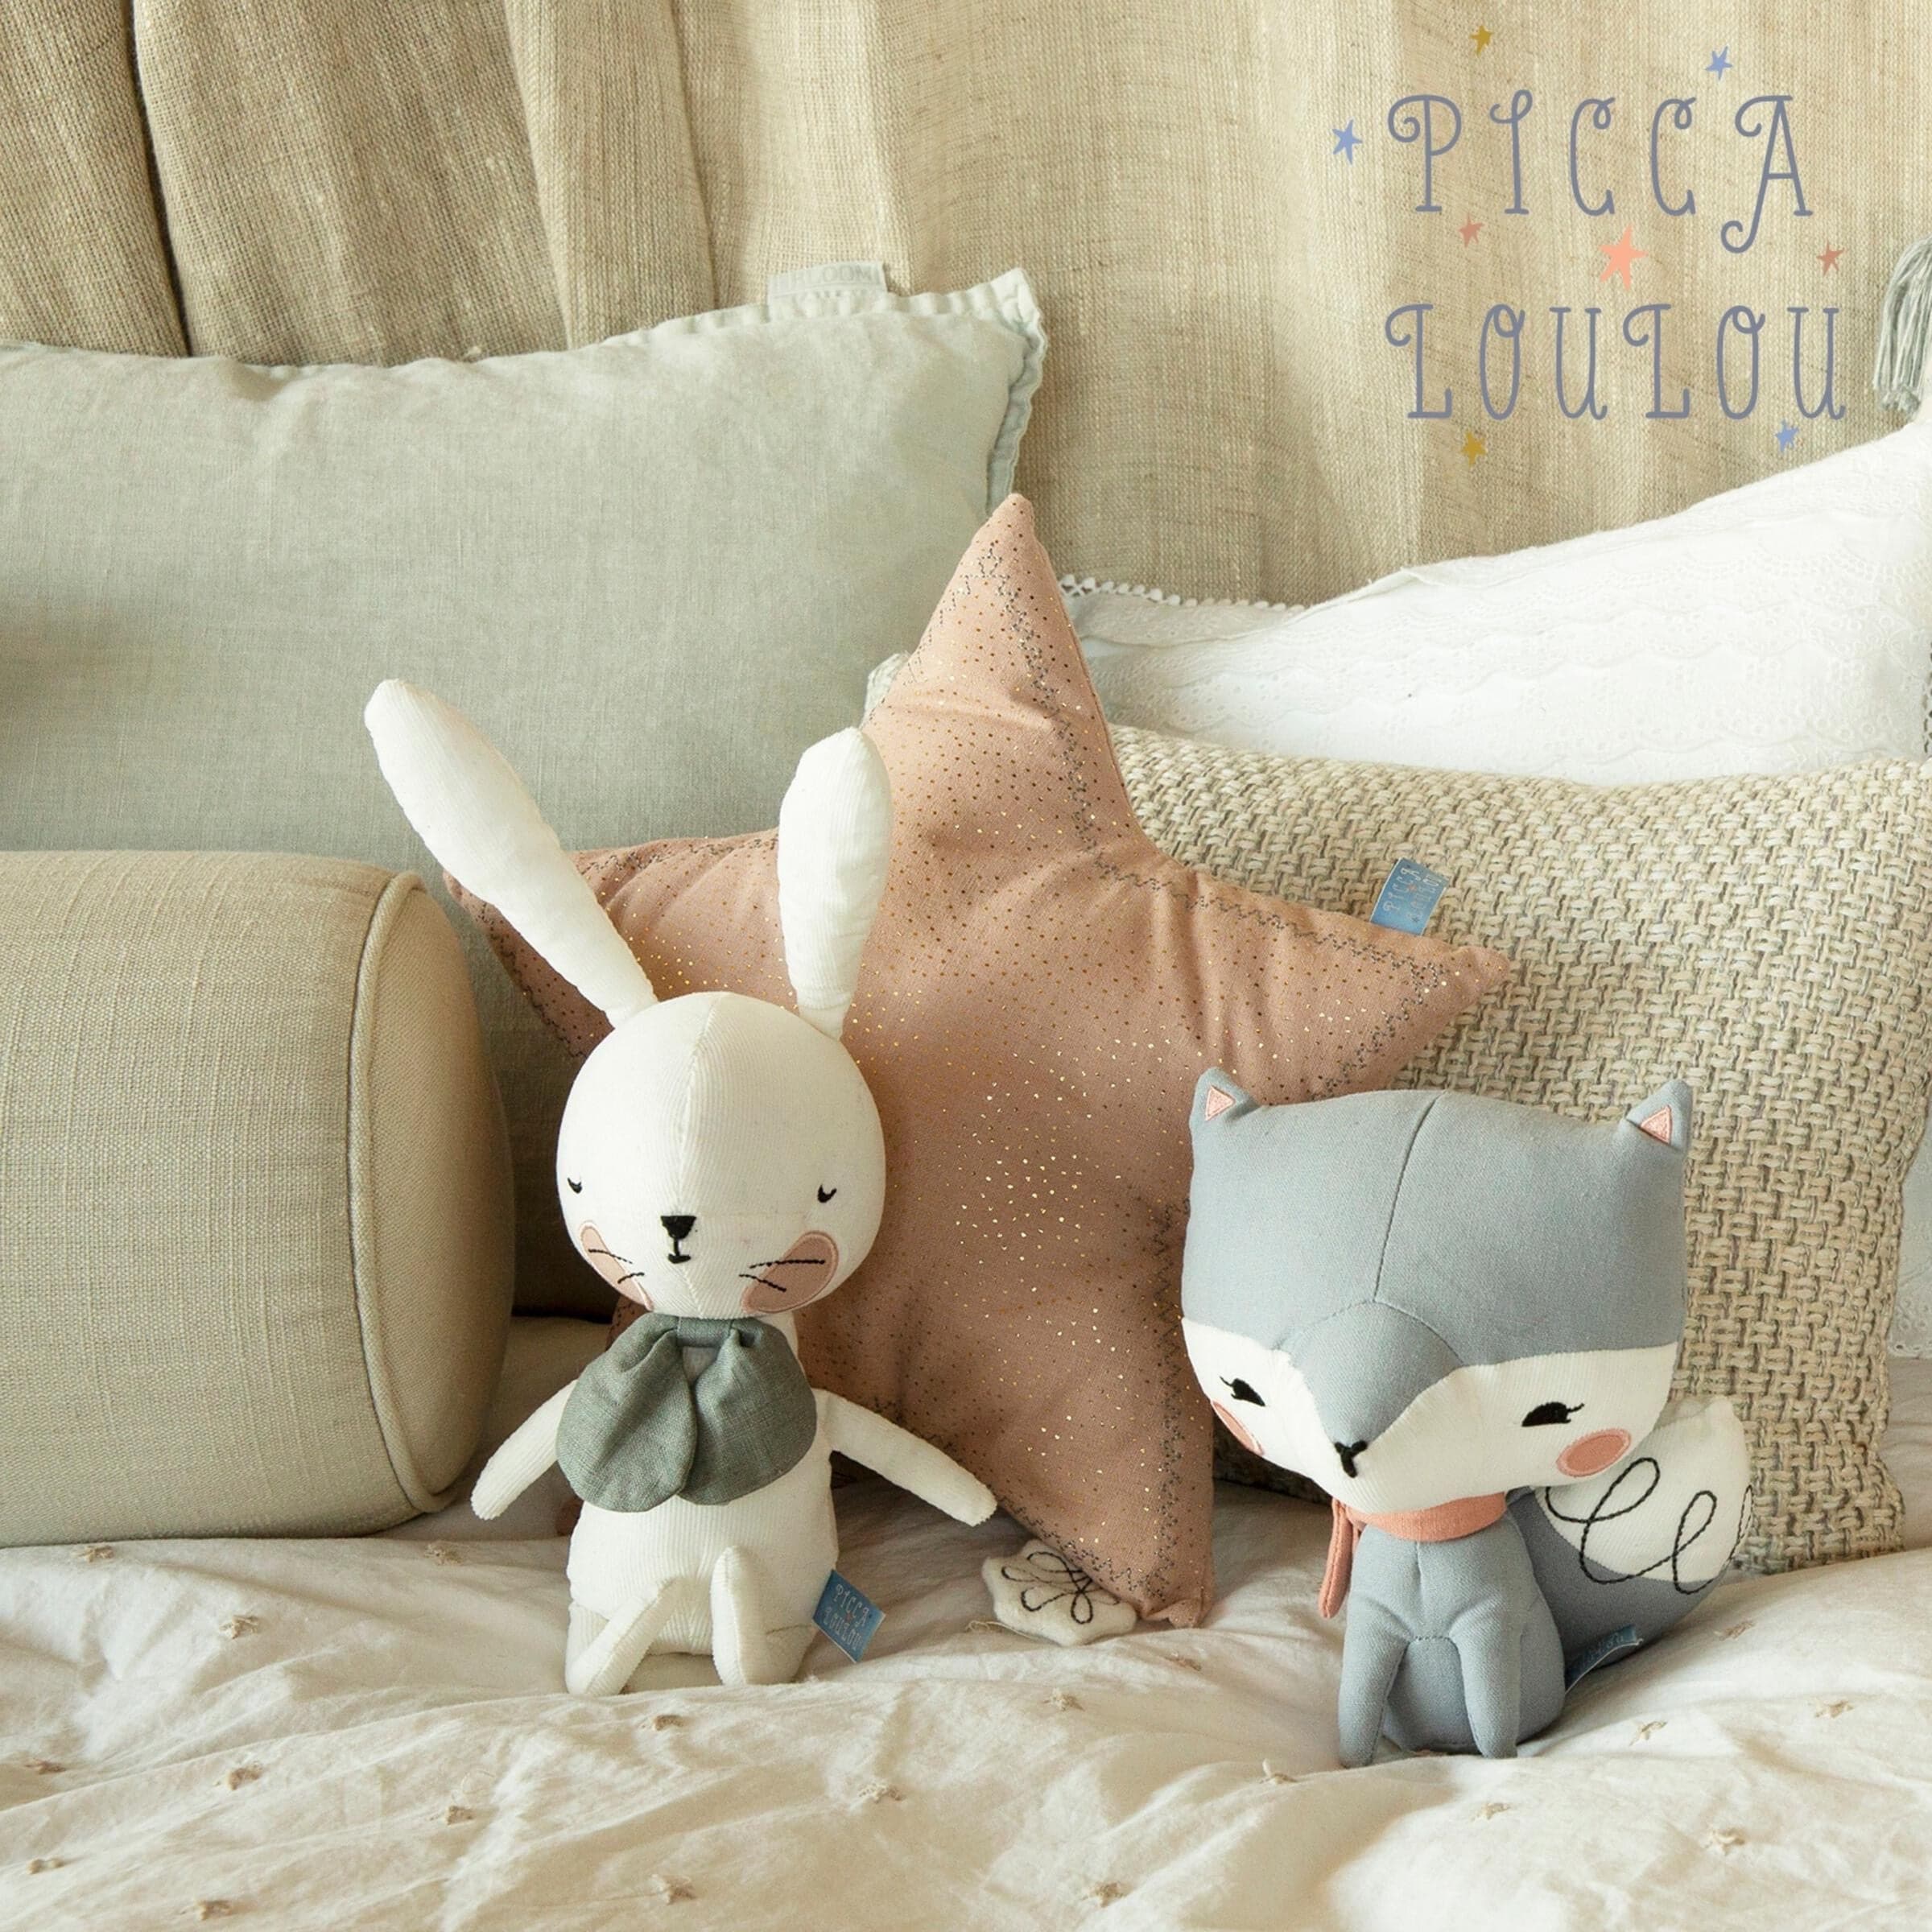 Picca Loulou | Blue Fox in Gift Box